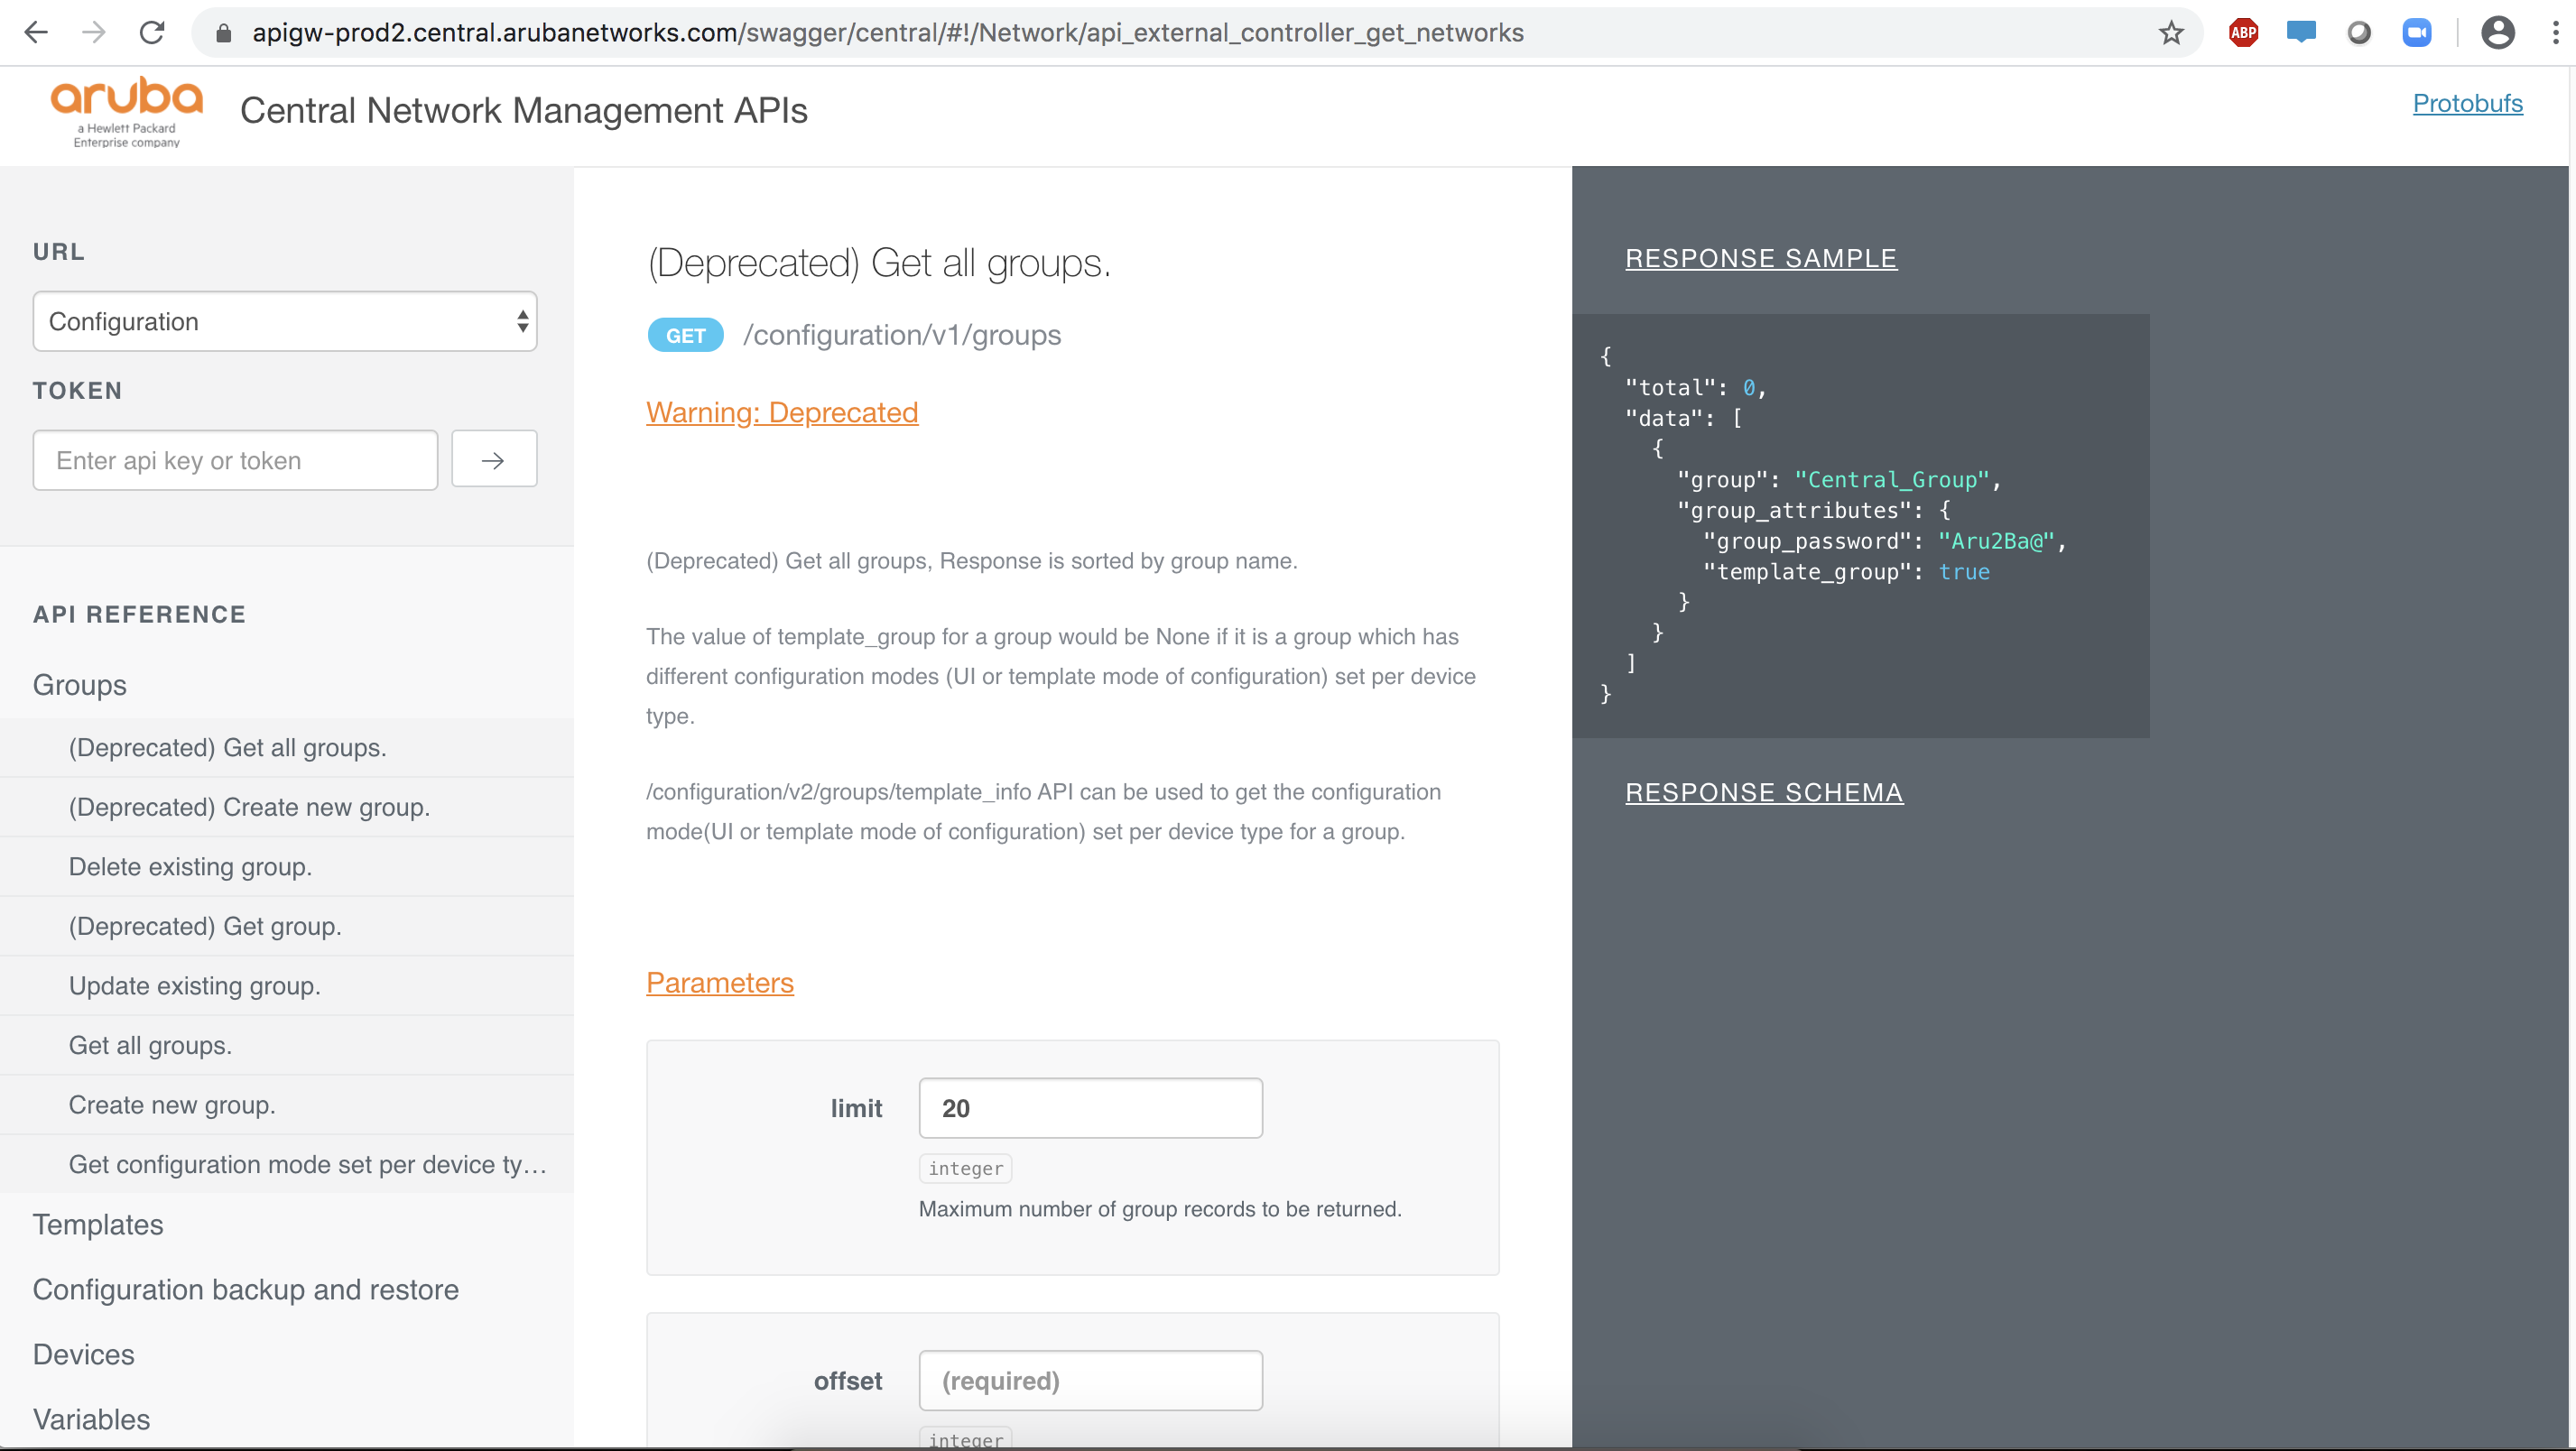 The API Gateway's swagger interface can be used to try out different APIs